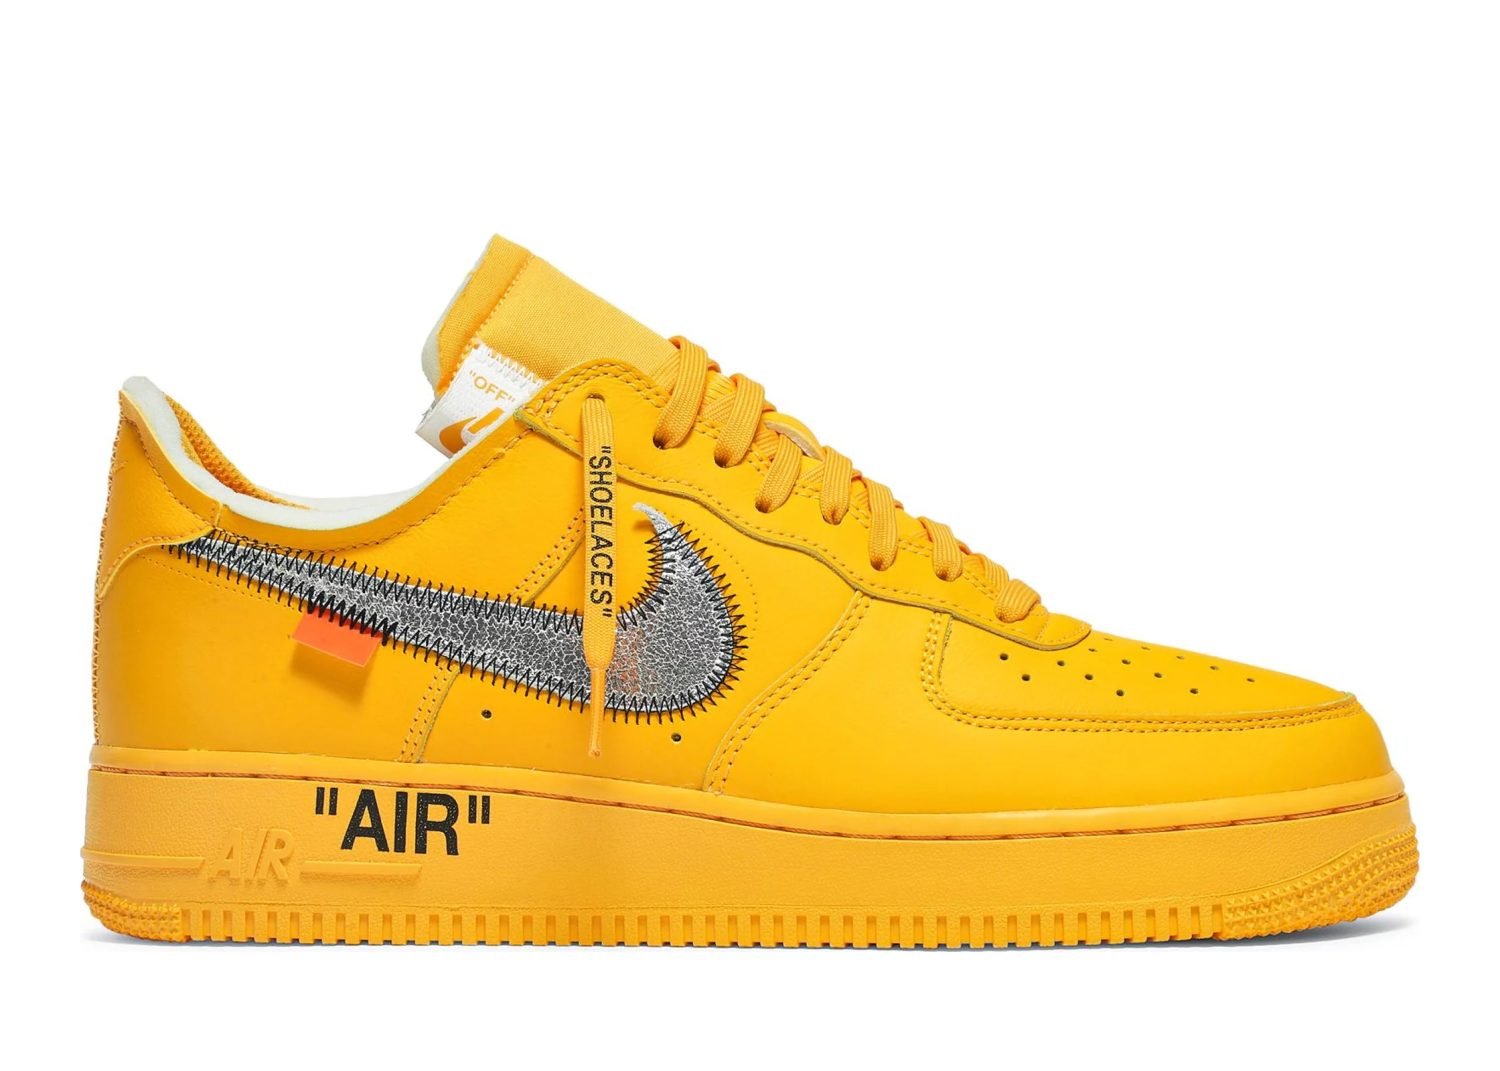 nike air force 1 low off white ica university gold